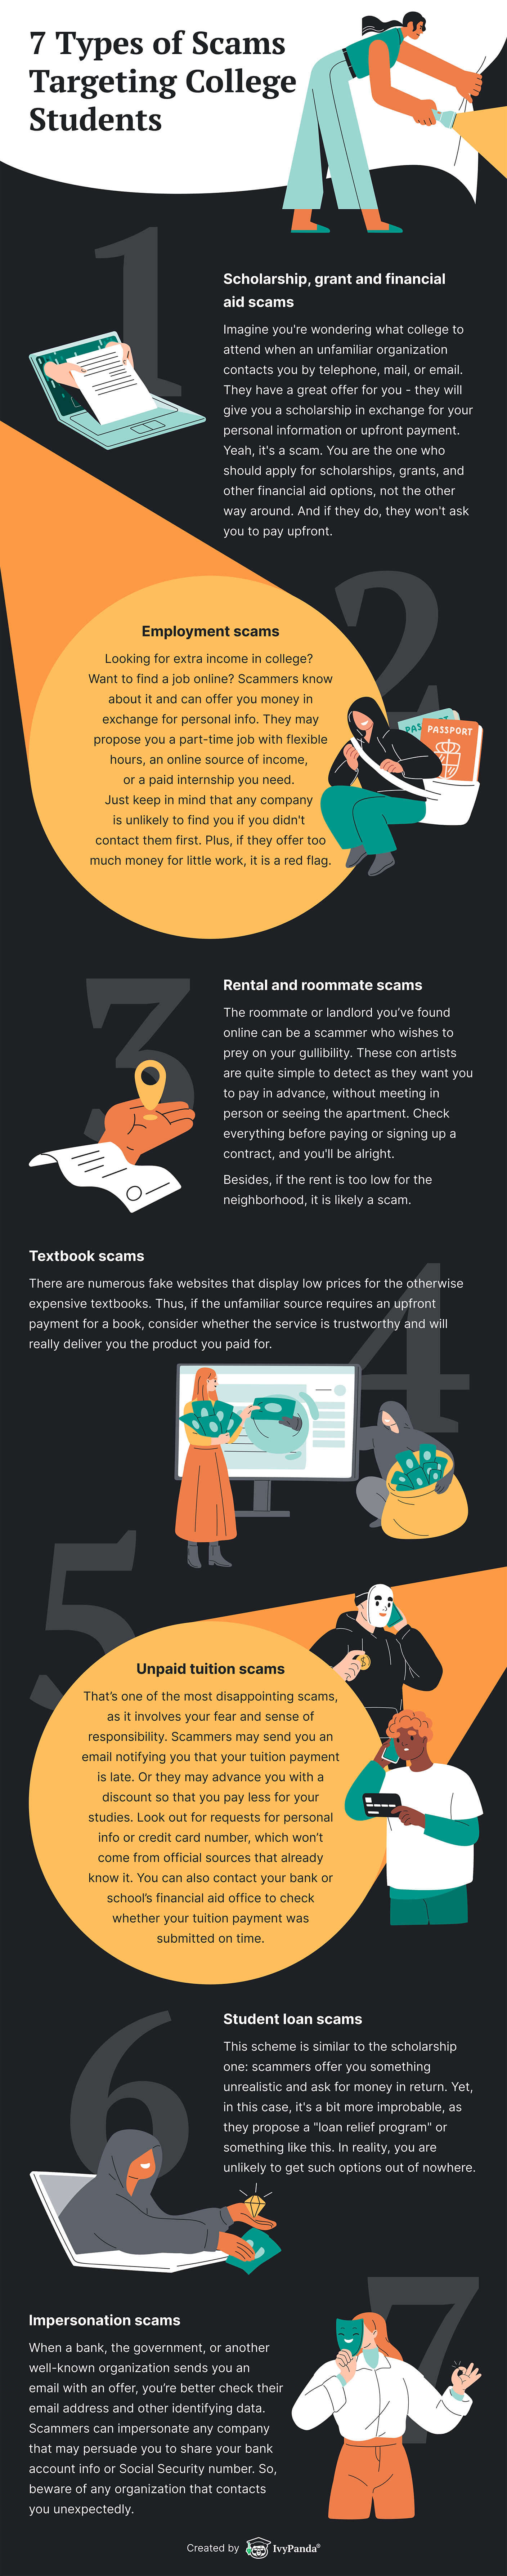 The infographic shows 7 types of scams targeting college students.